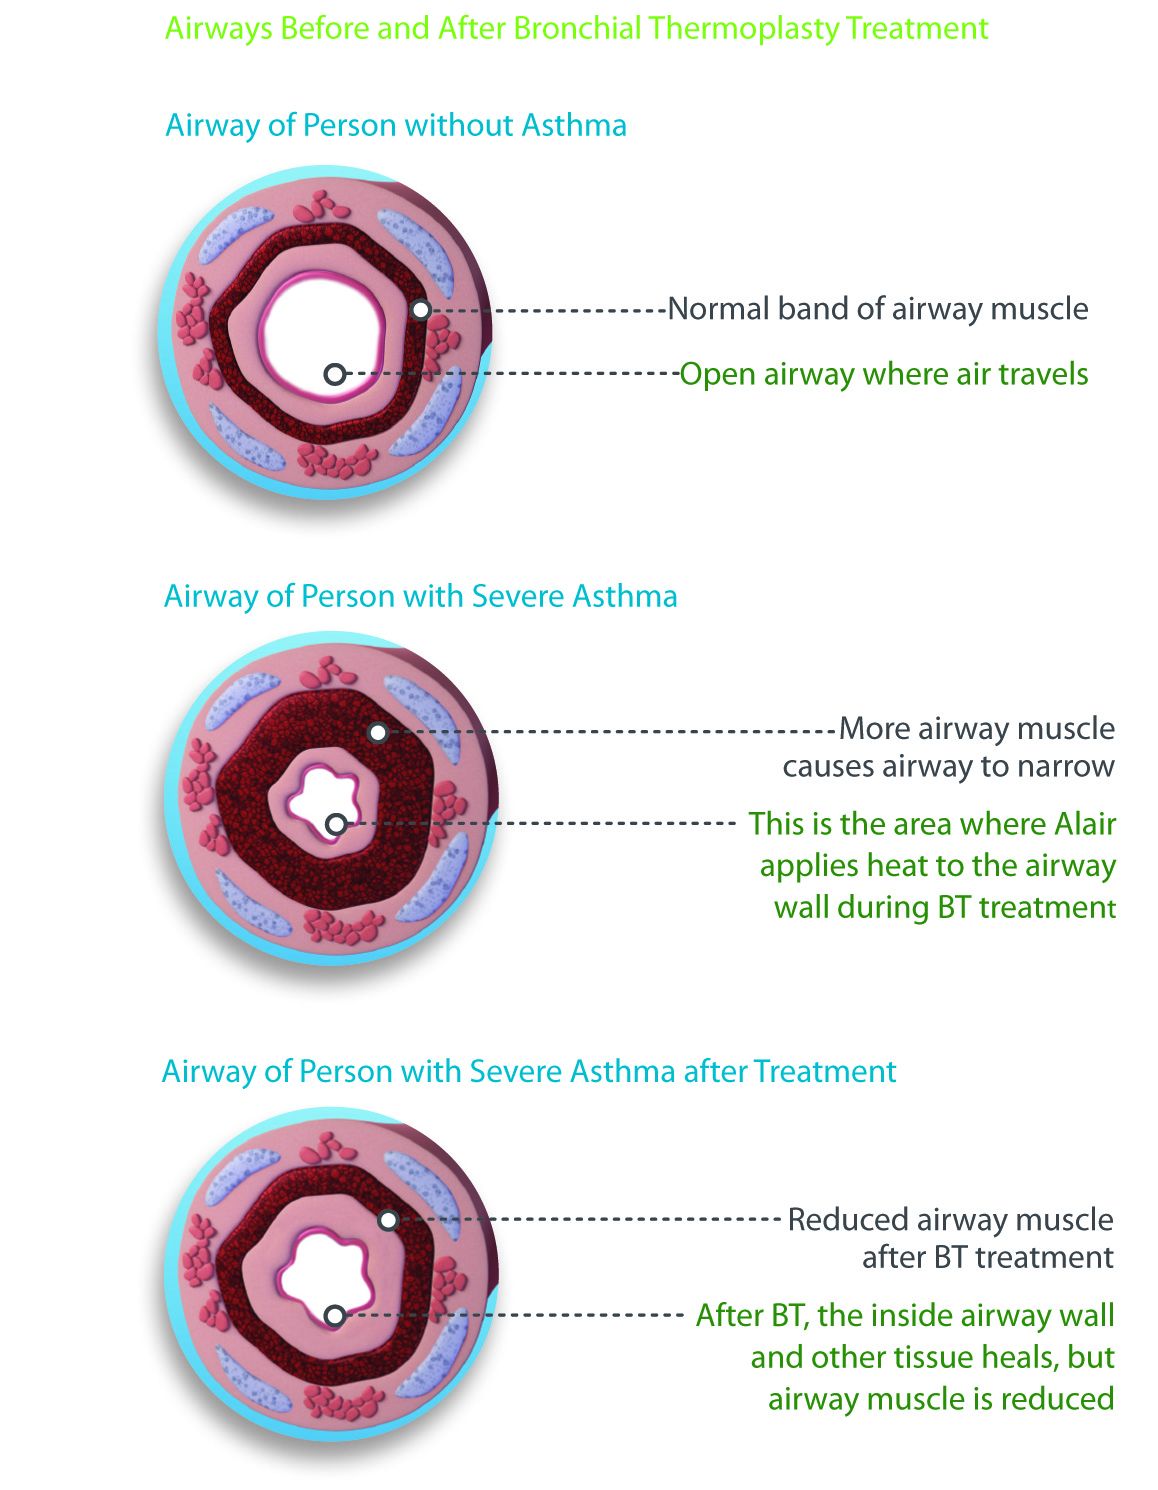 Various cross sections of airways, comparing those with asthma to those without.